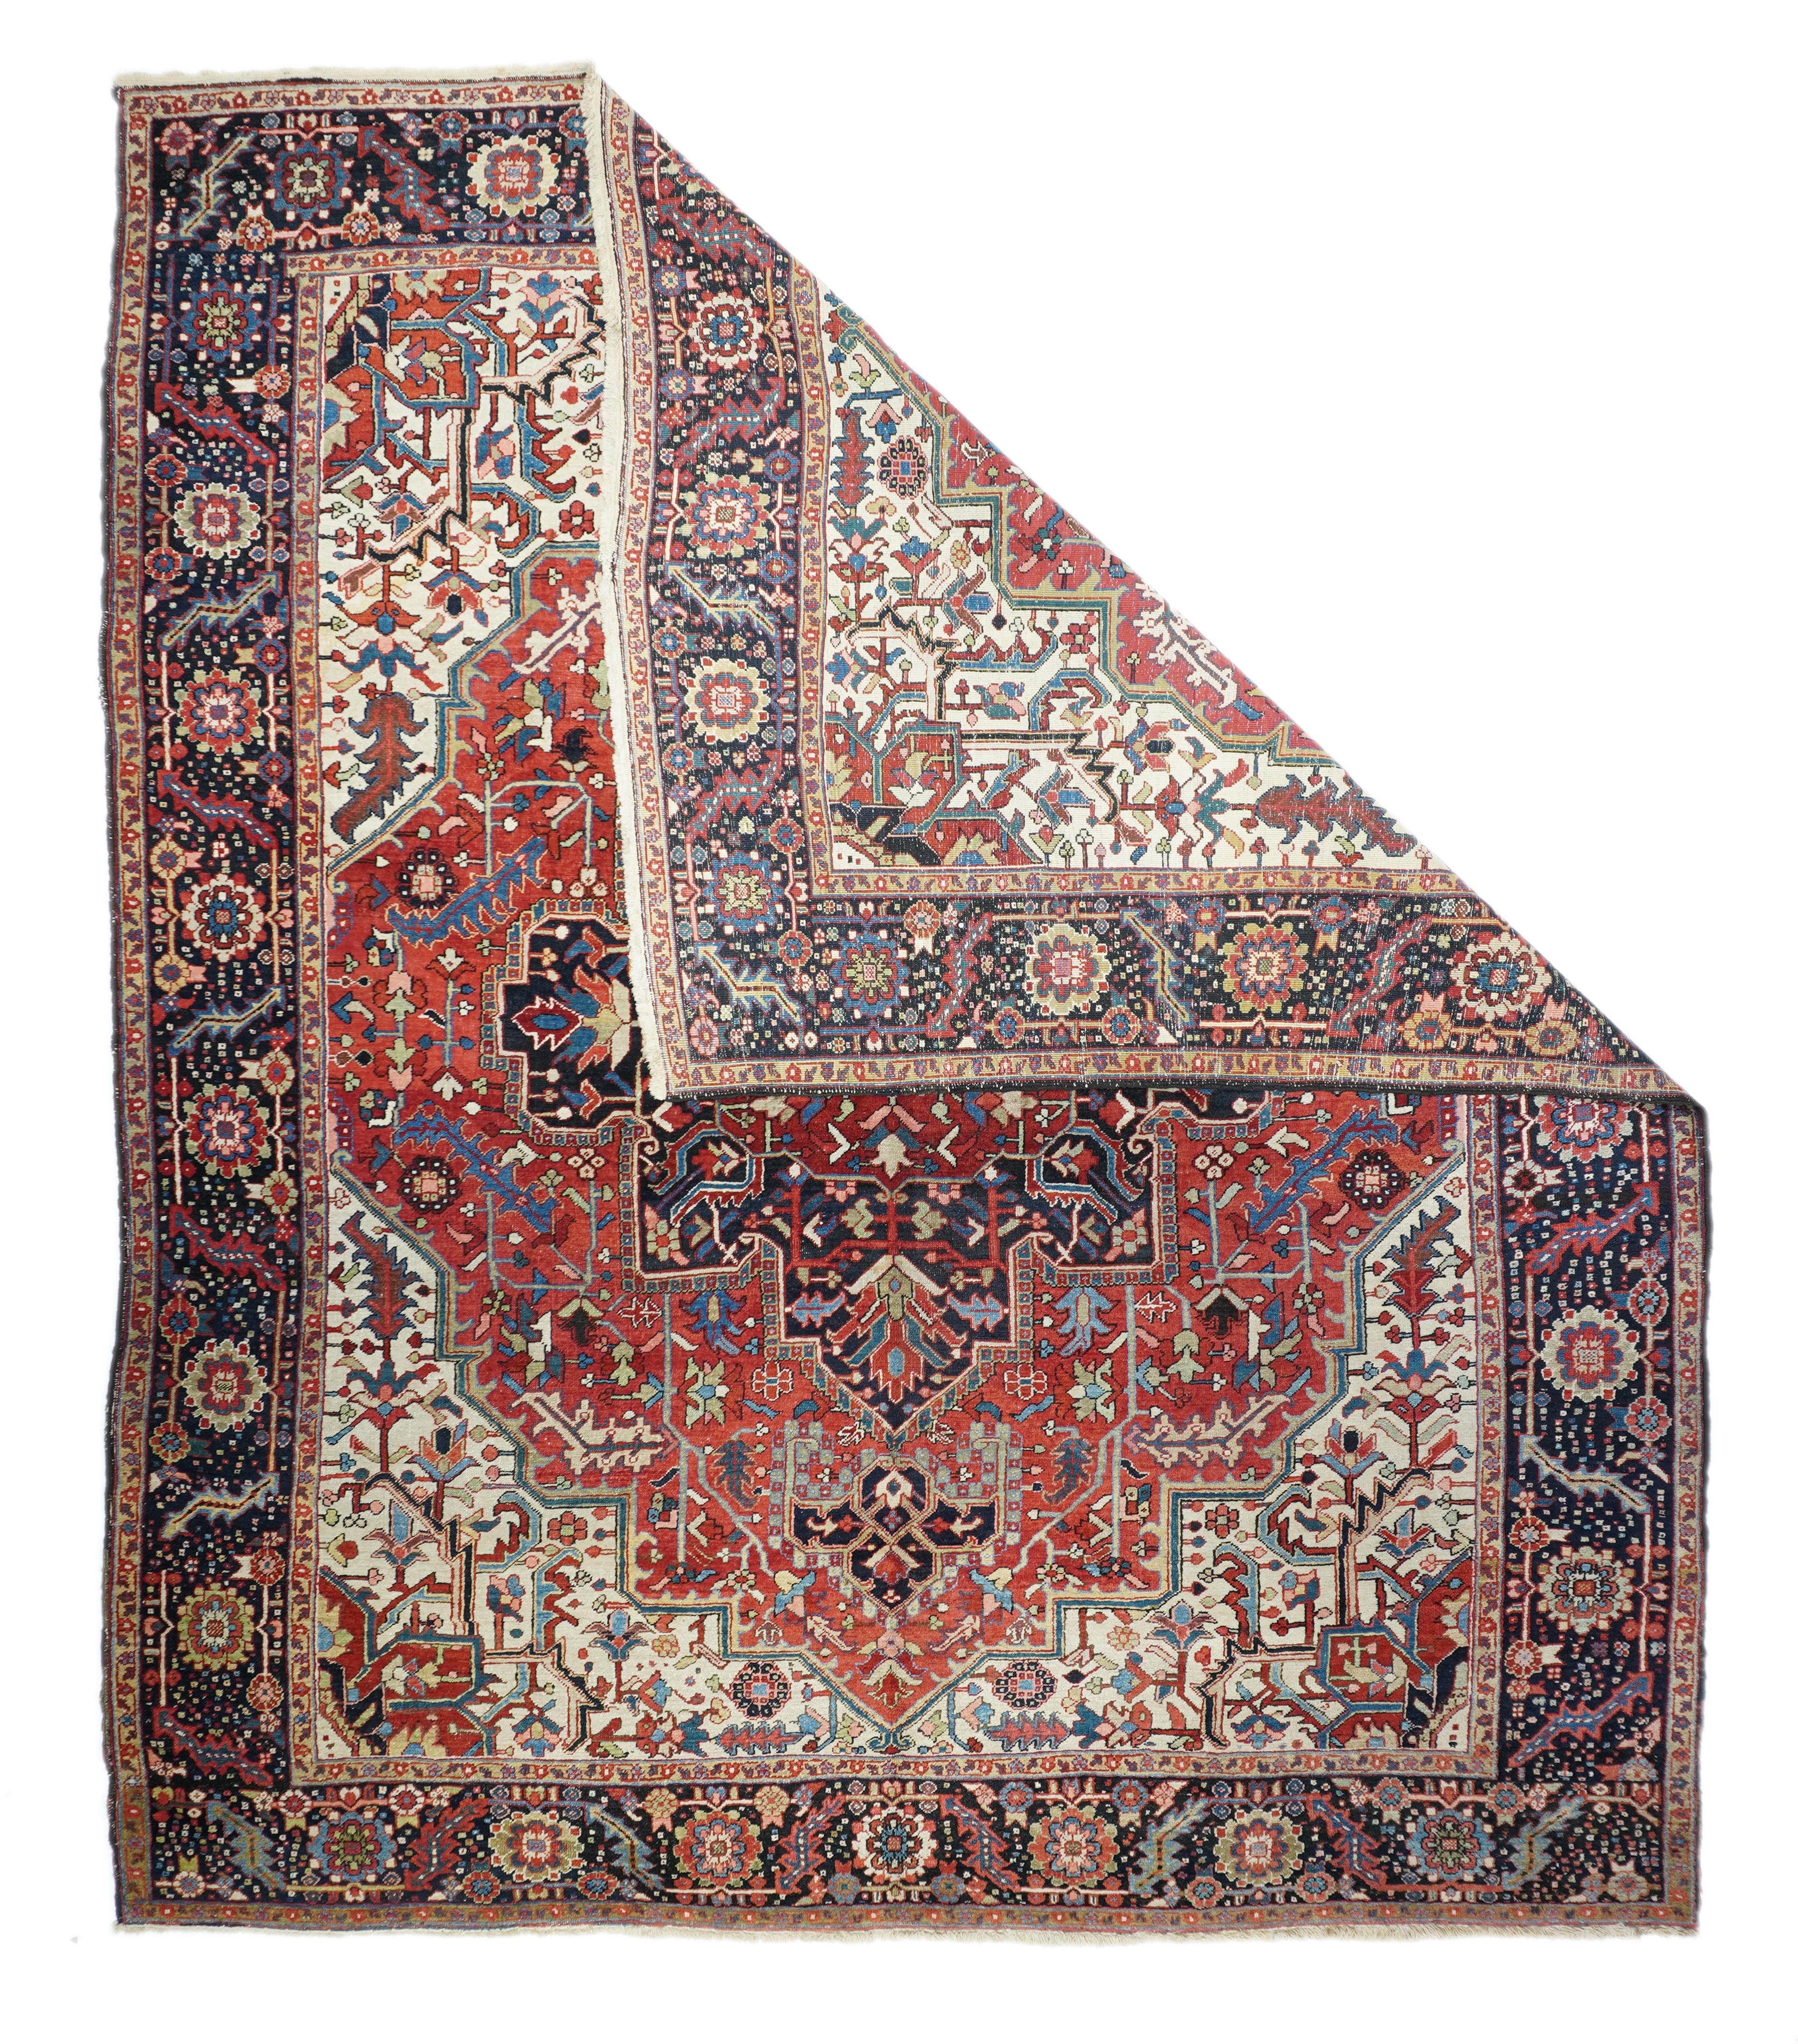 This well-woven, “Serapi” quality room size rustic carpet shows a stepped and angled abrashed red field supporting a pendanted navy stepped and lobed medallion with an inner blood red square floral cartouche. Ecru corners with mobile formal vinery